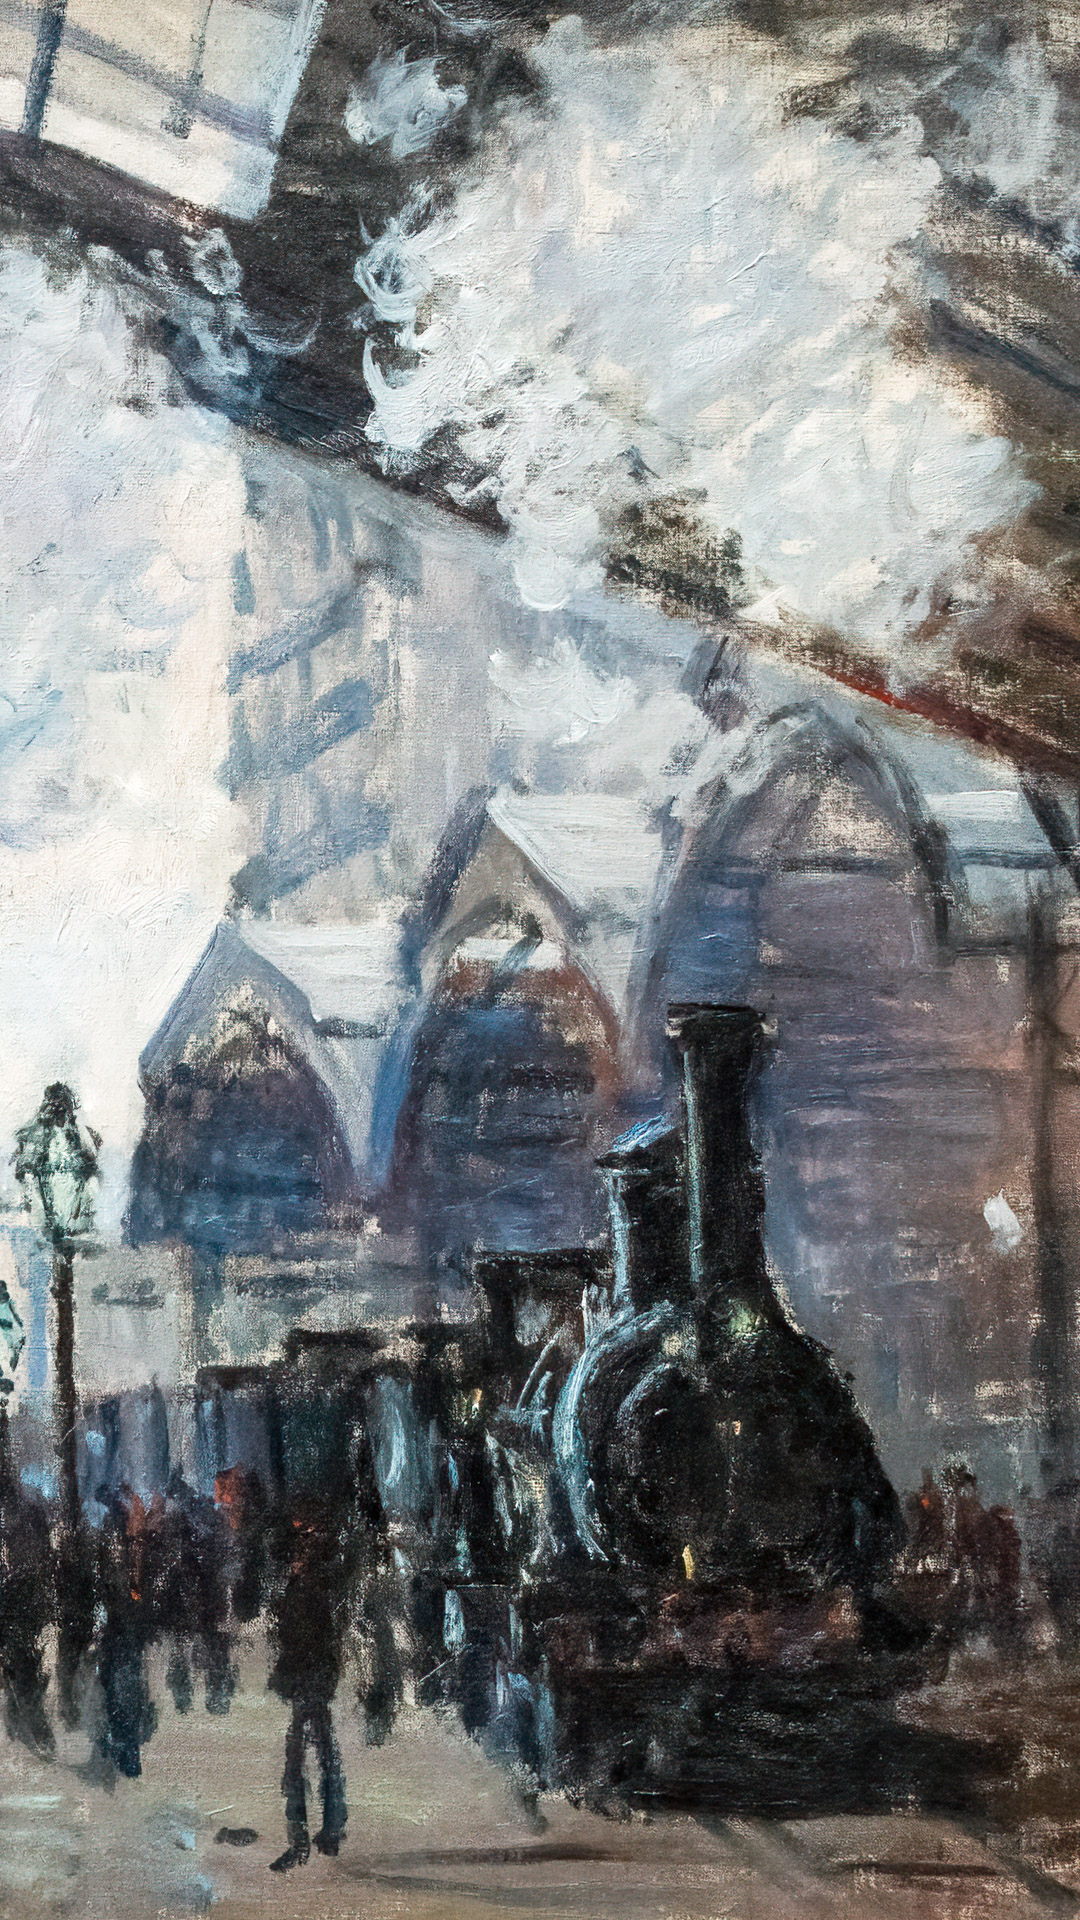 Experience the allure of impressionist art with Claude Monet's 'The Gare Saint-Lazare' screensaver.